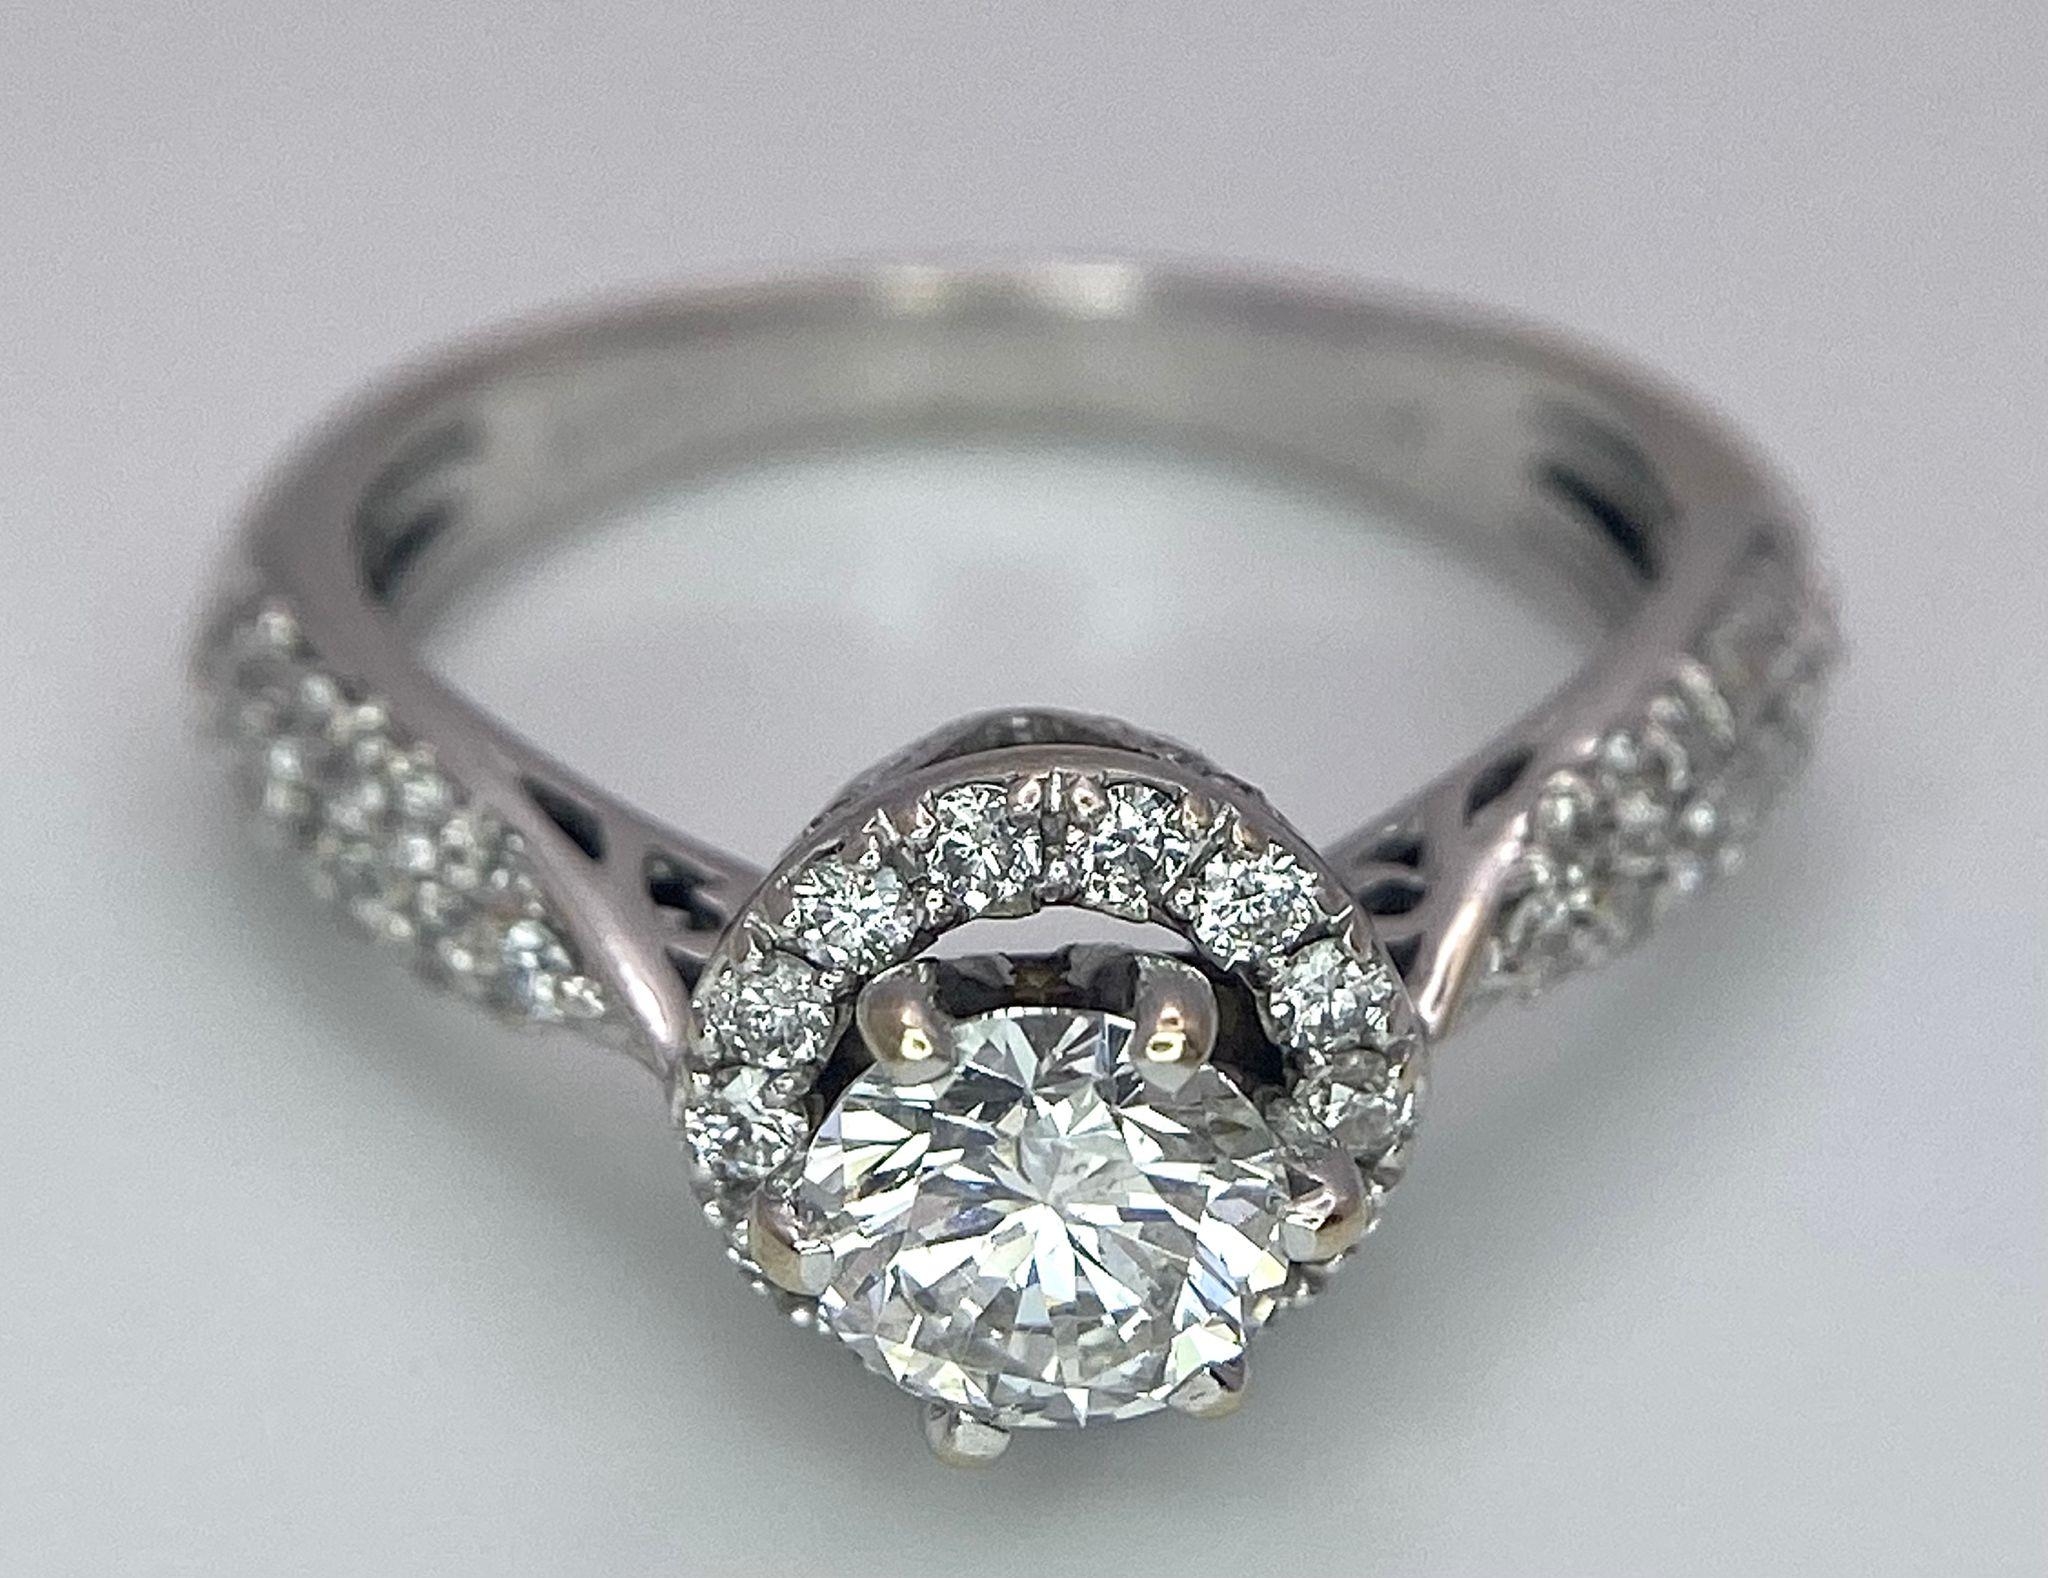 An 18K White Gold Diamond Ring. Central 0.75ct brilliant round cut diamond with a diamond halo and - Image 8 of 10